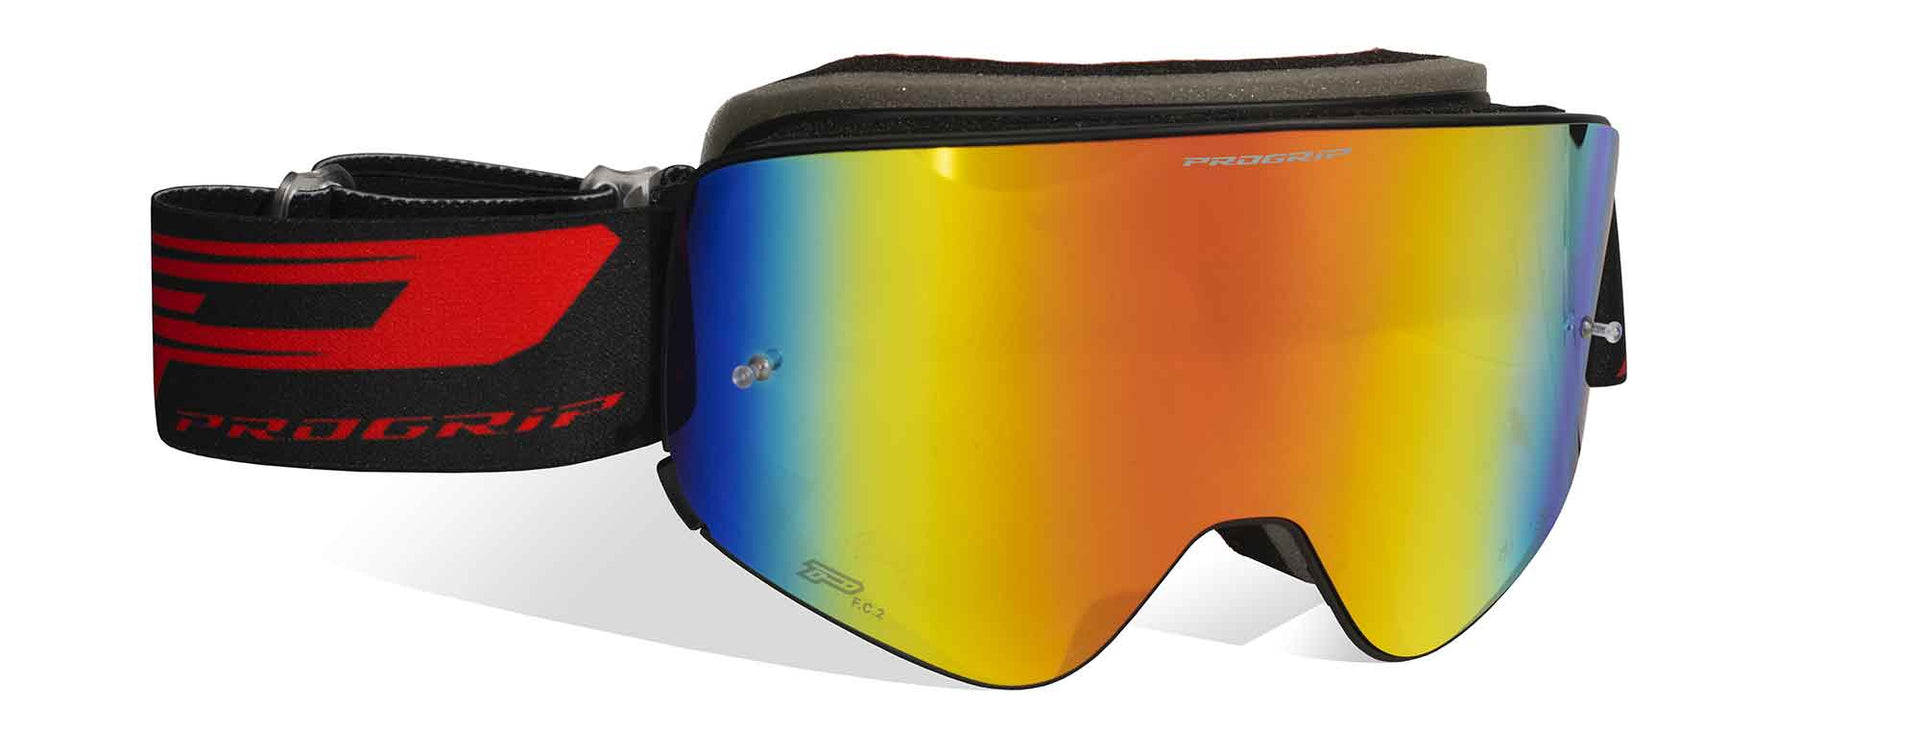 Pro Grip - Magnet Goggles